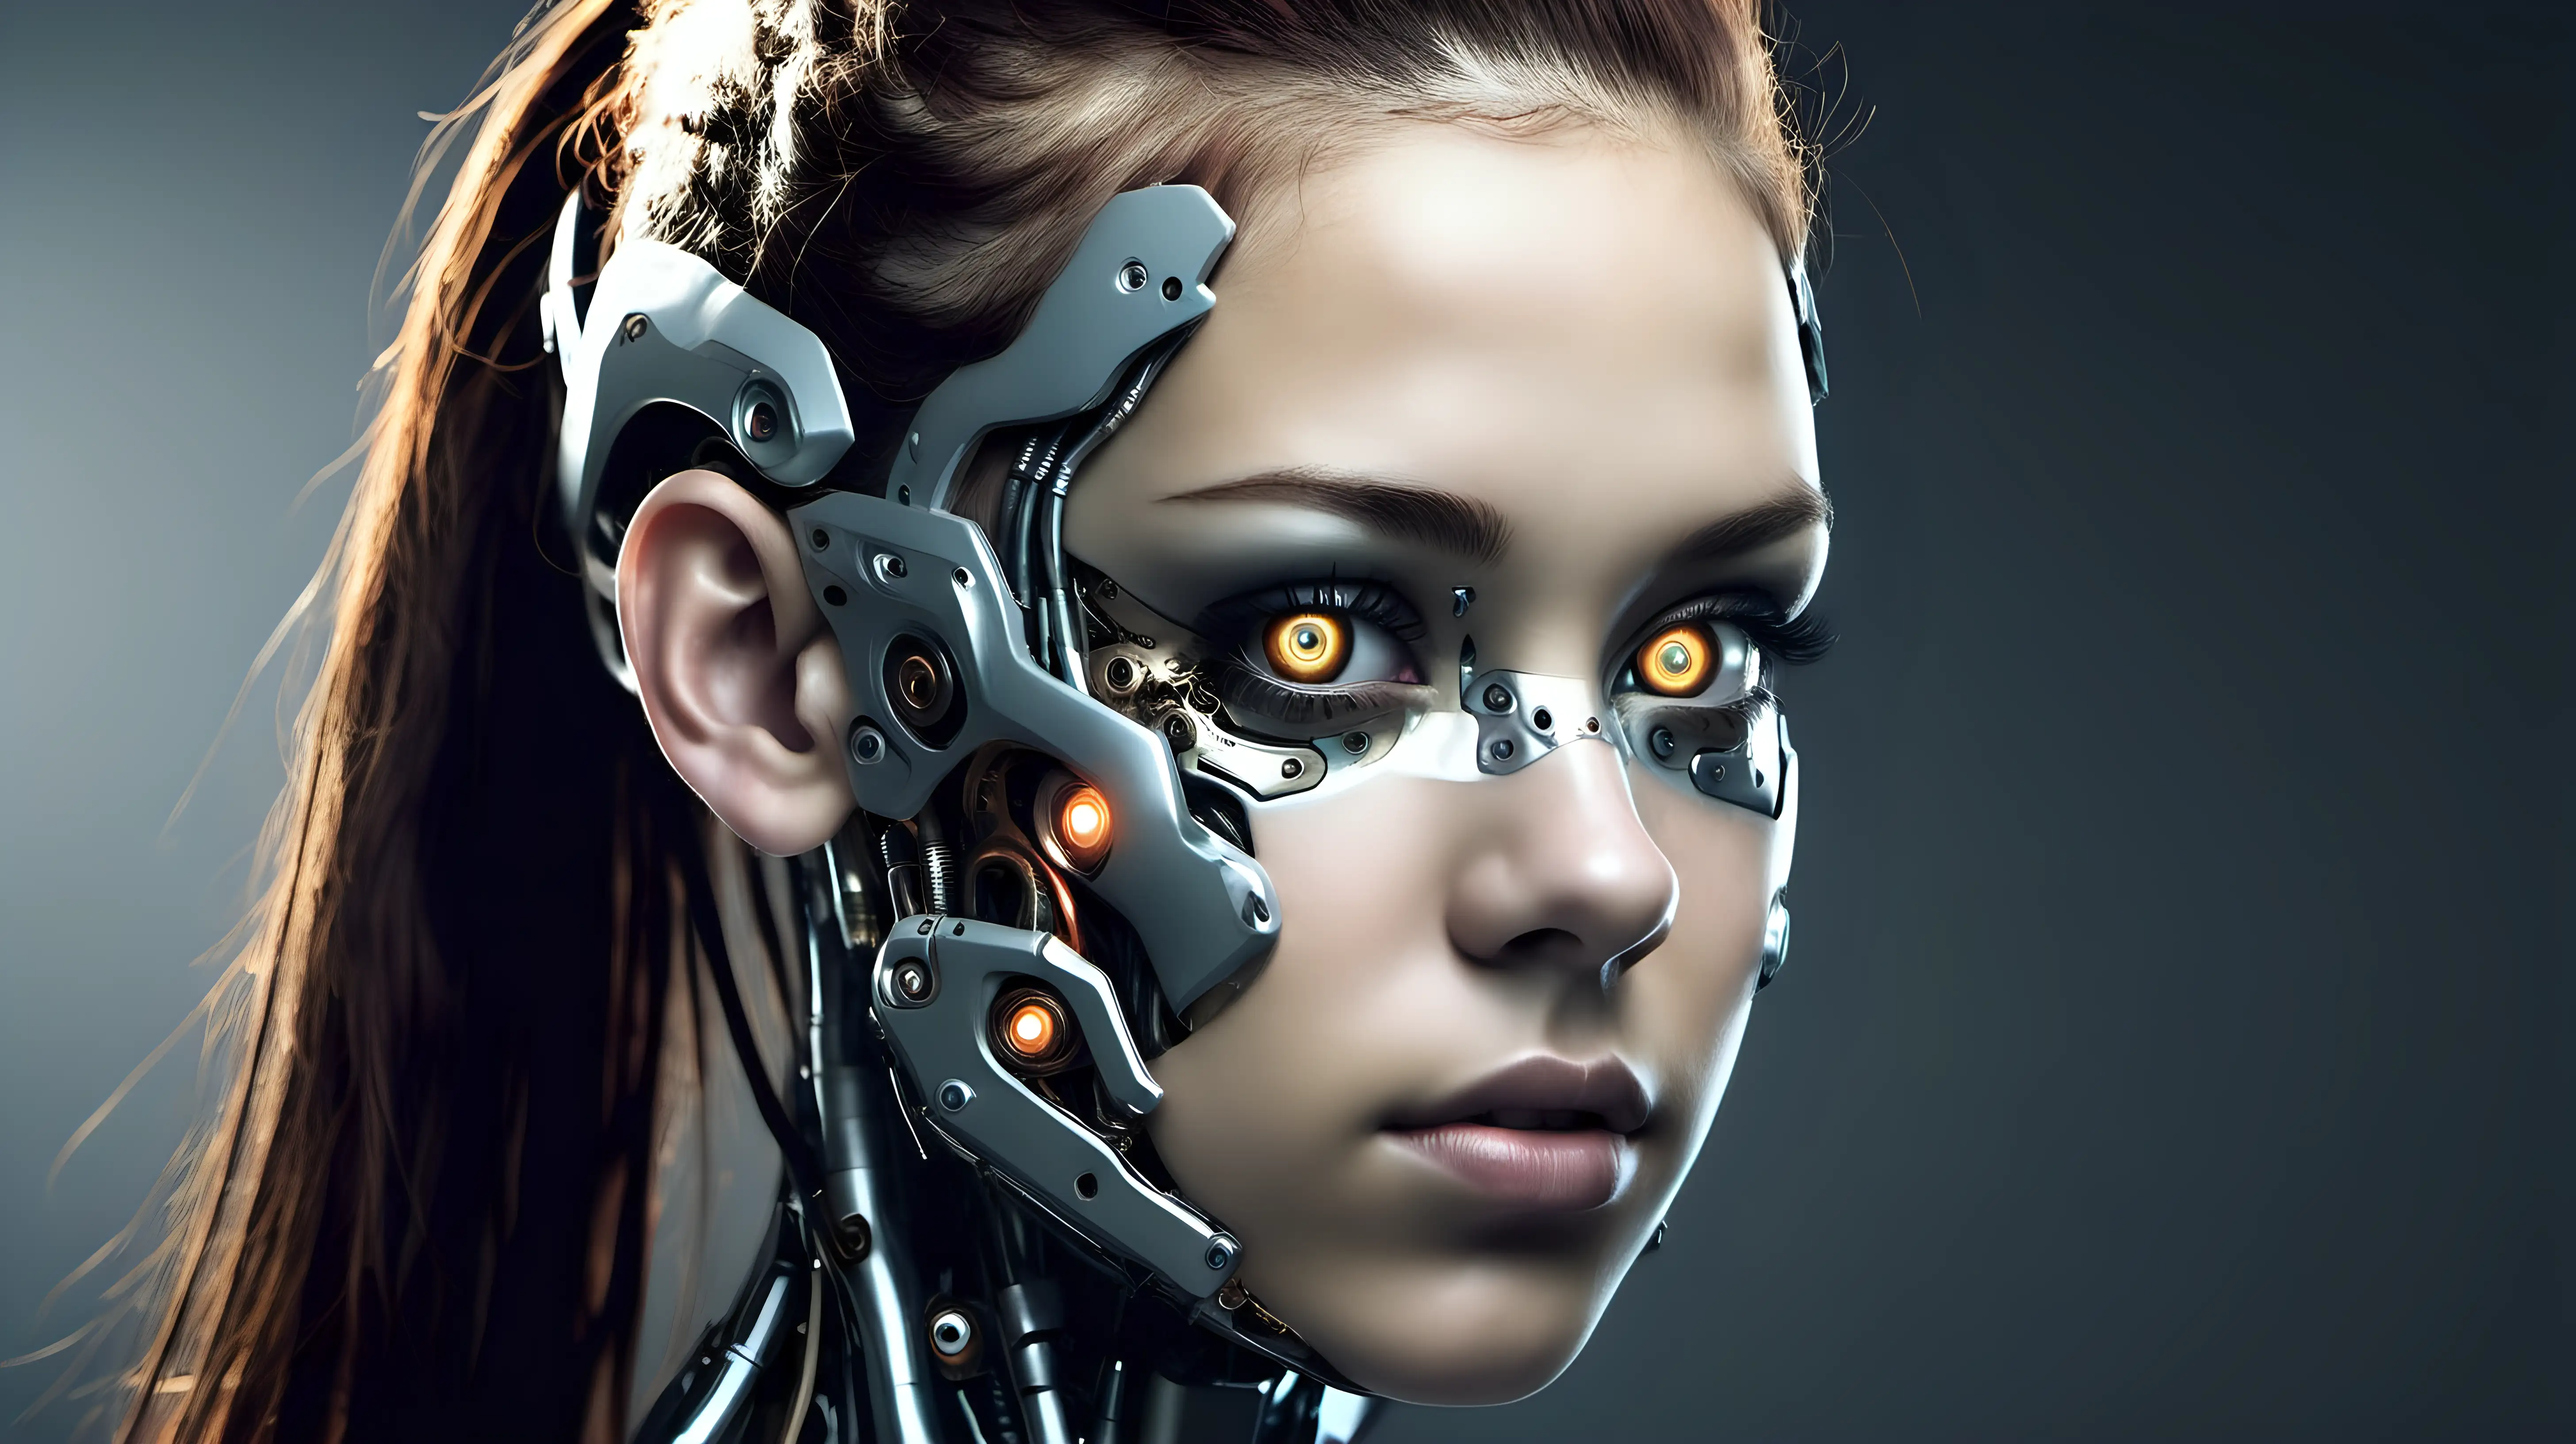 Beautiful 18YearOld Cyborg Woman with Enchanting Cybernetic Features